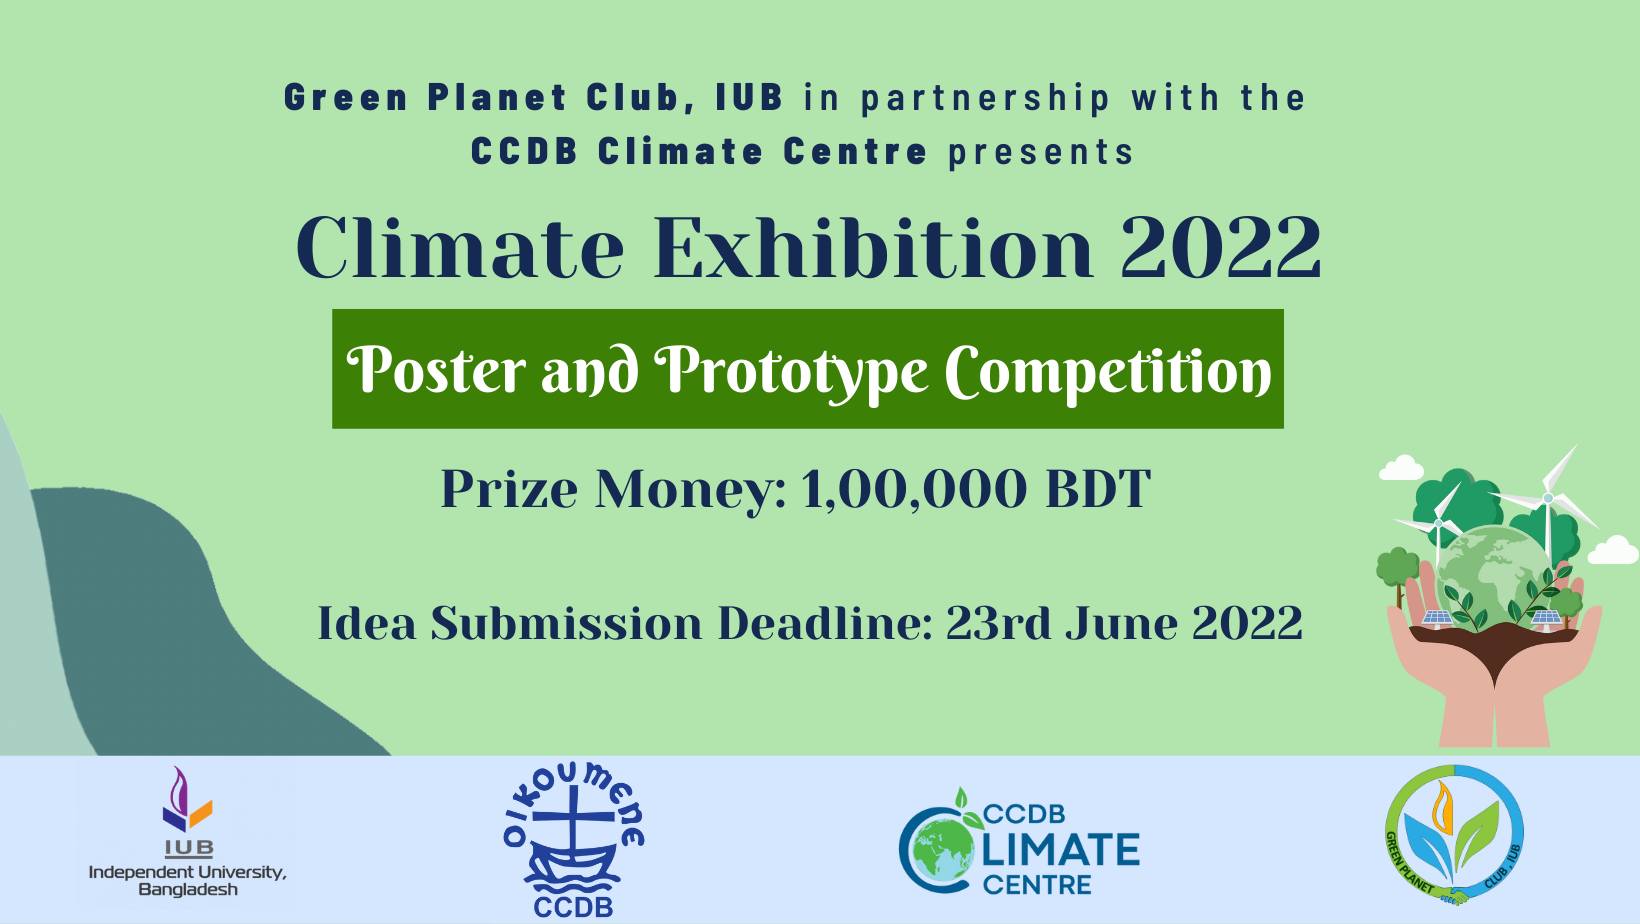 Award Ceremony of Climate Exhibition 2022 to be held in IUB